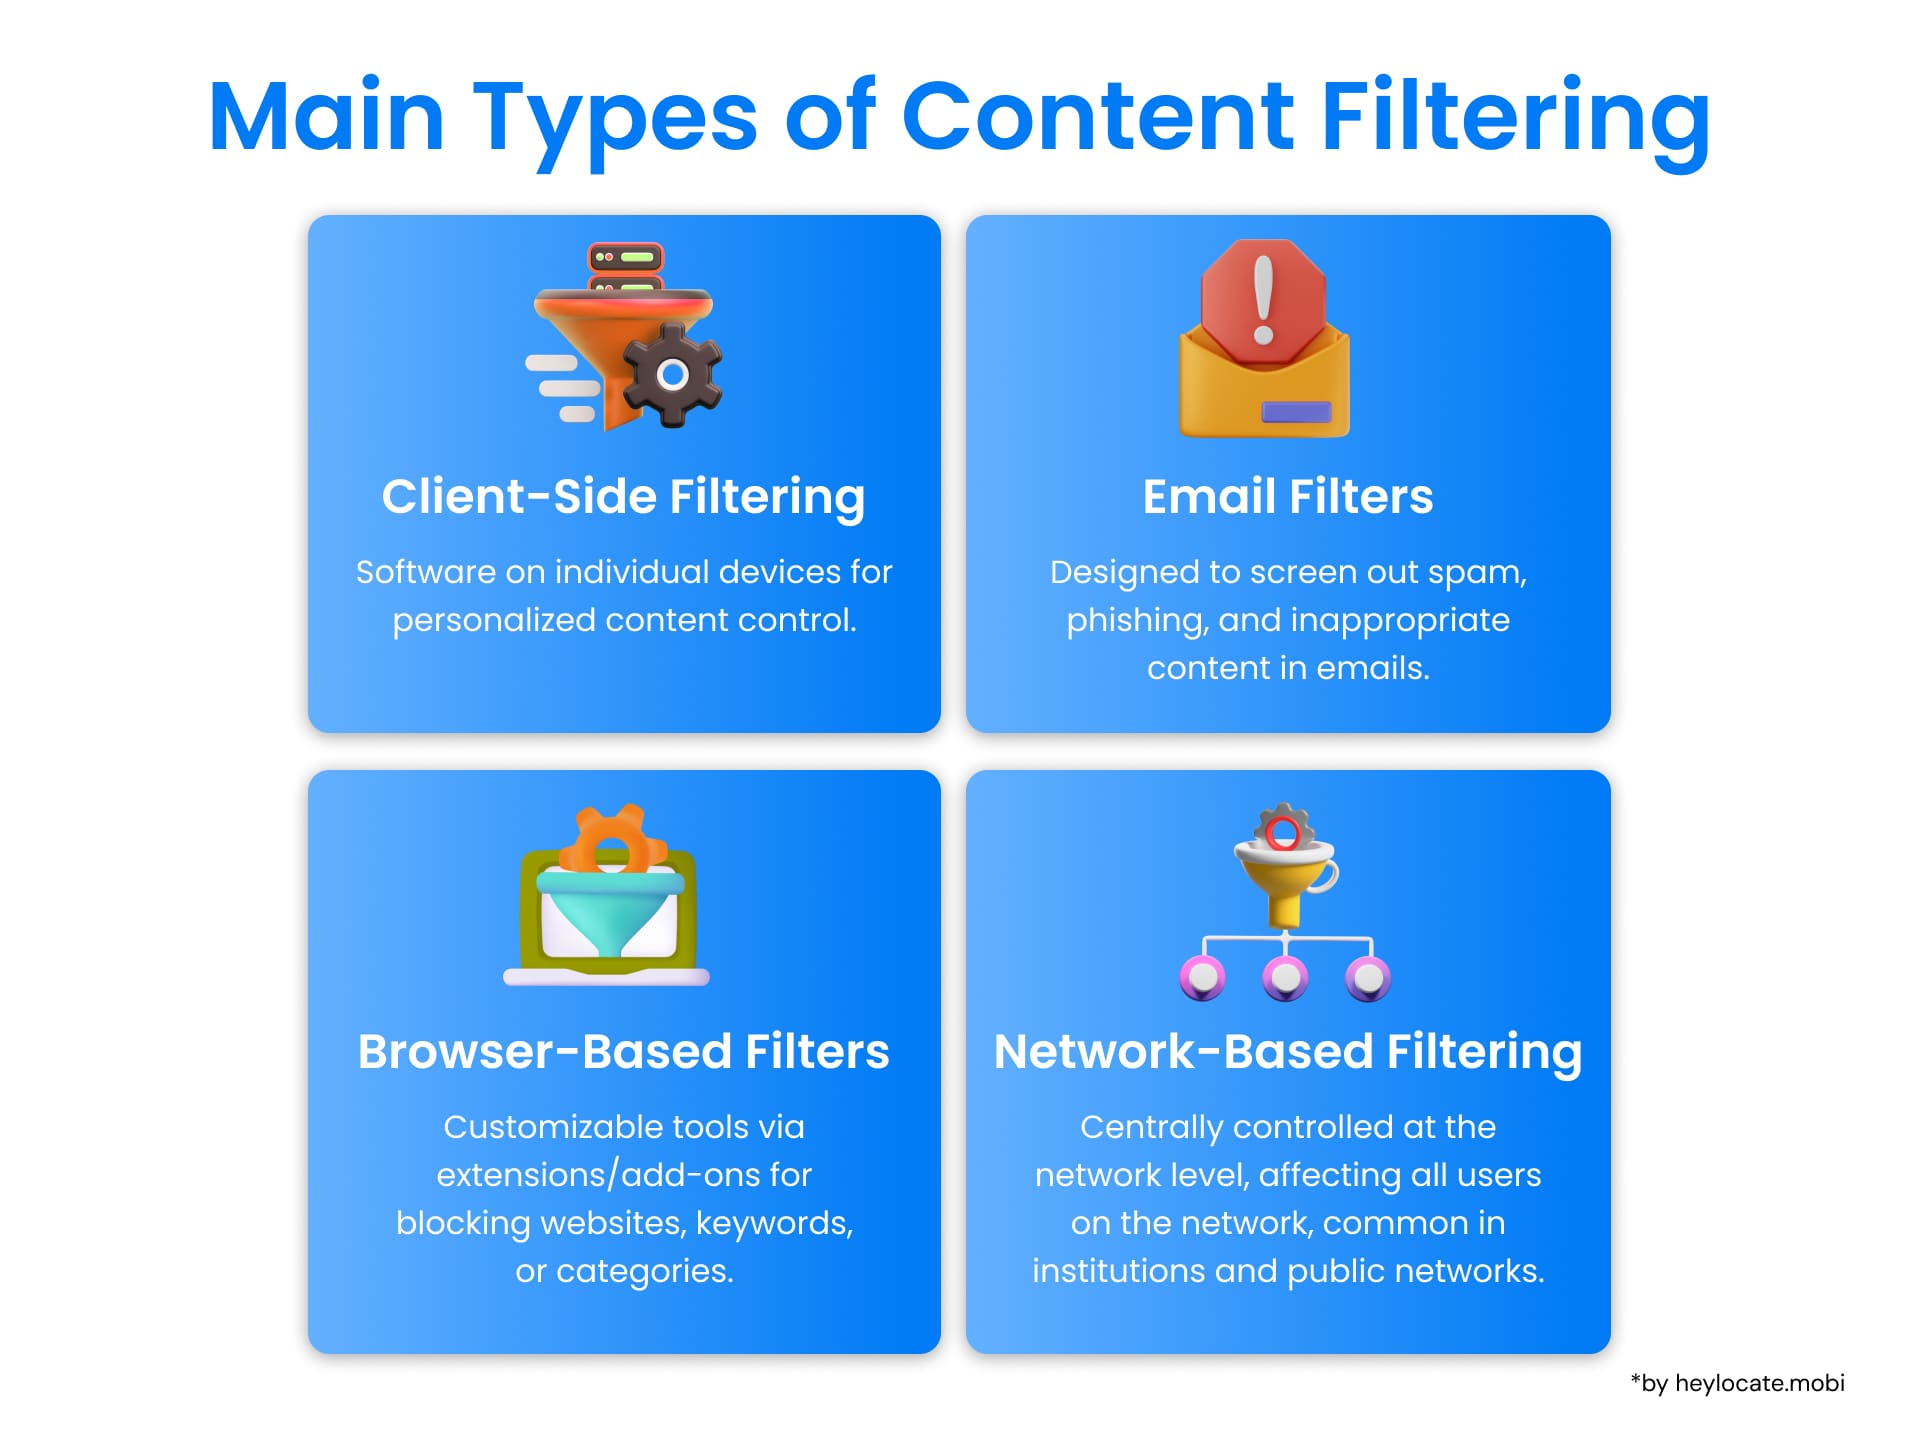 A depiction of the main types of content filtering: Client-based filtering; email filters; browser-based filters; network-based filtering